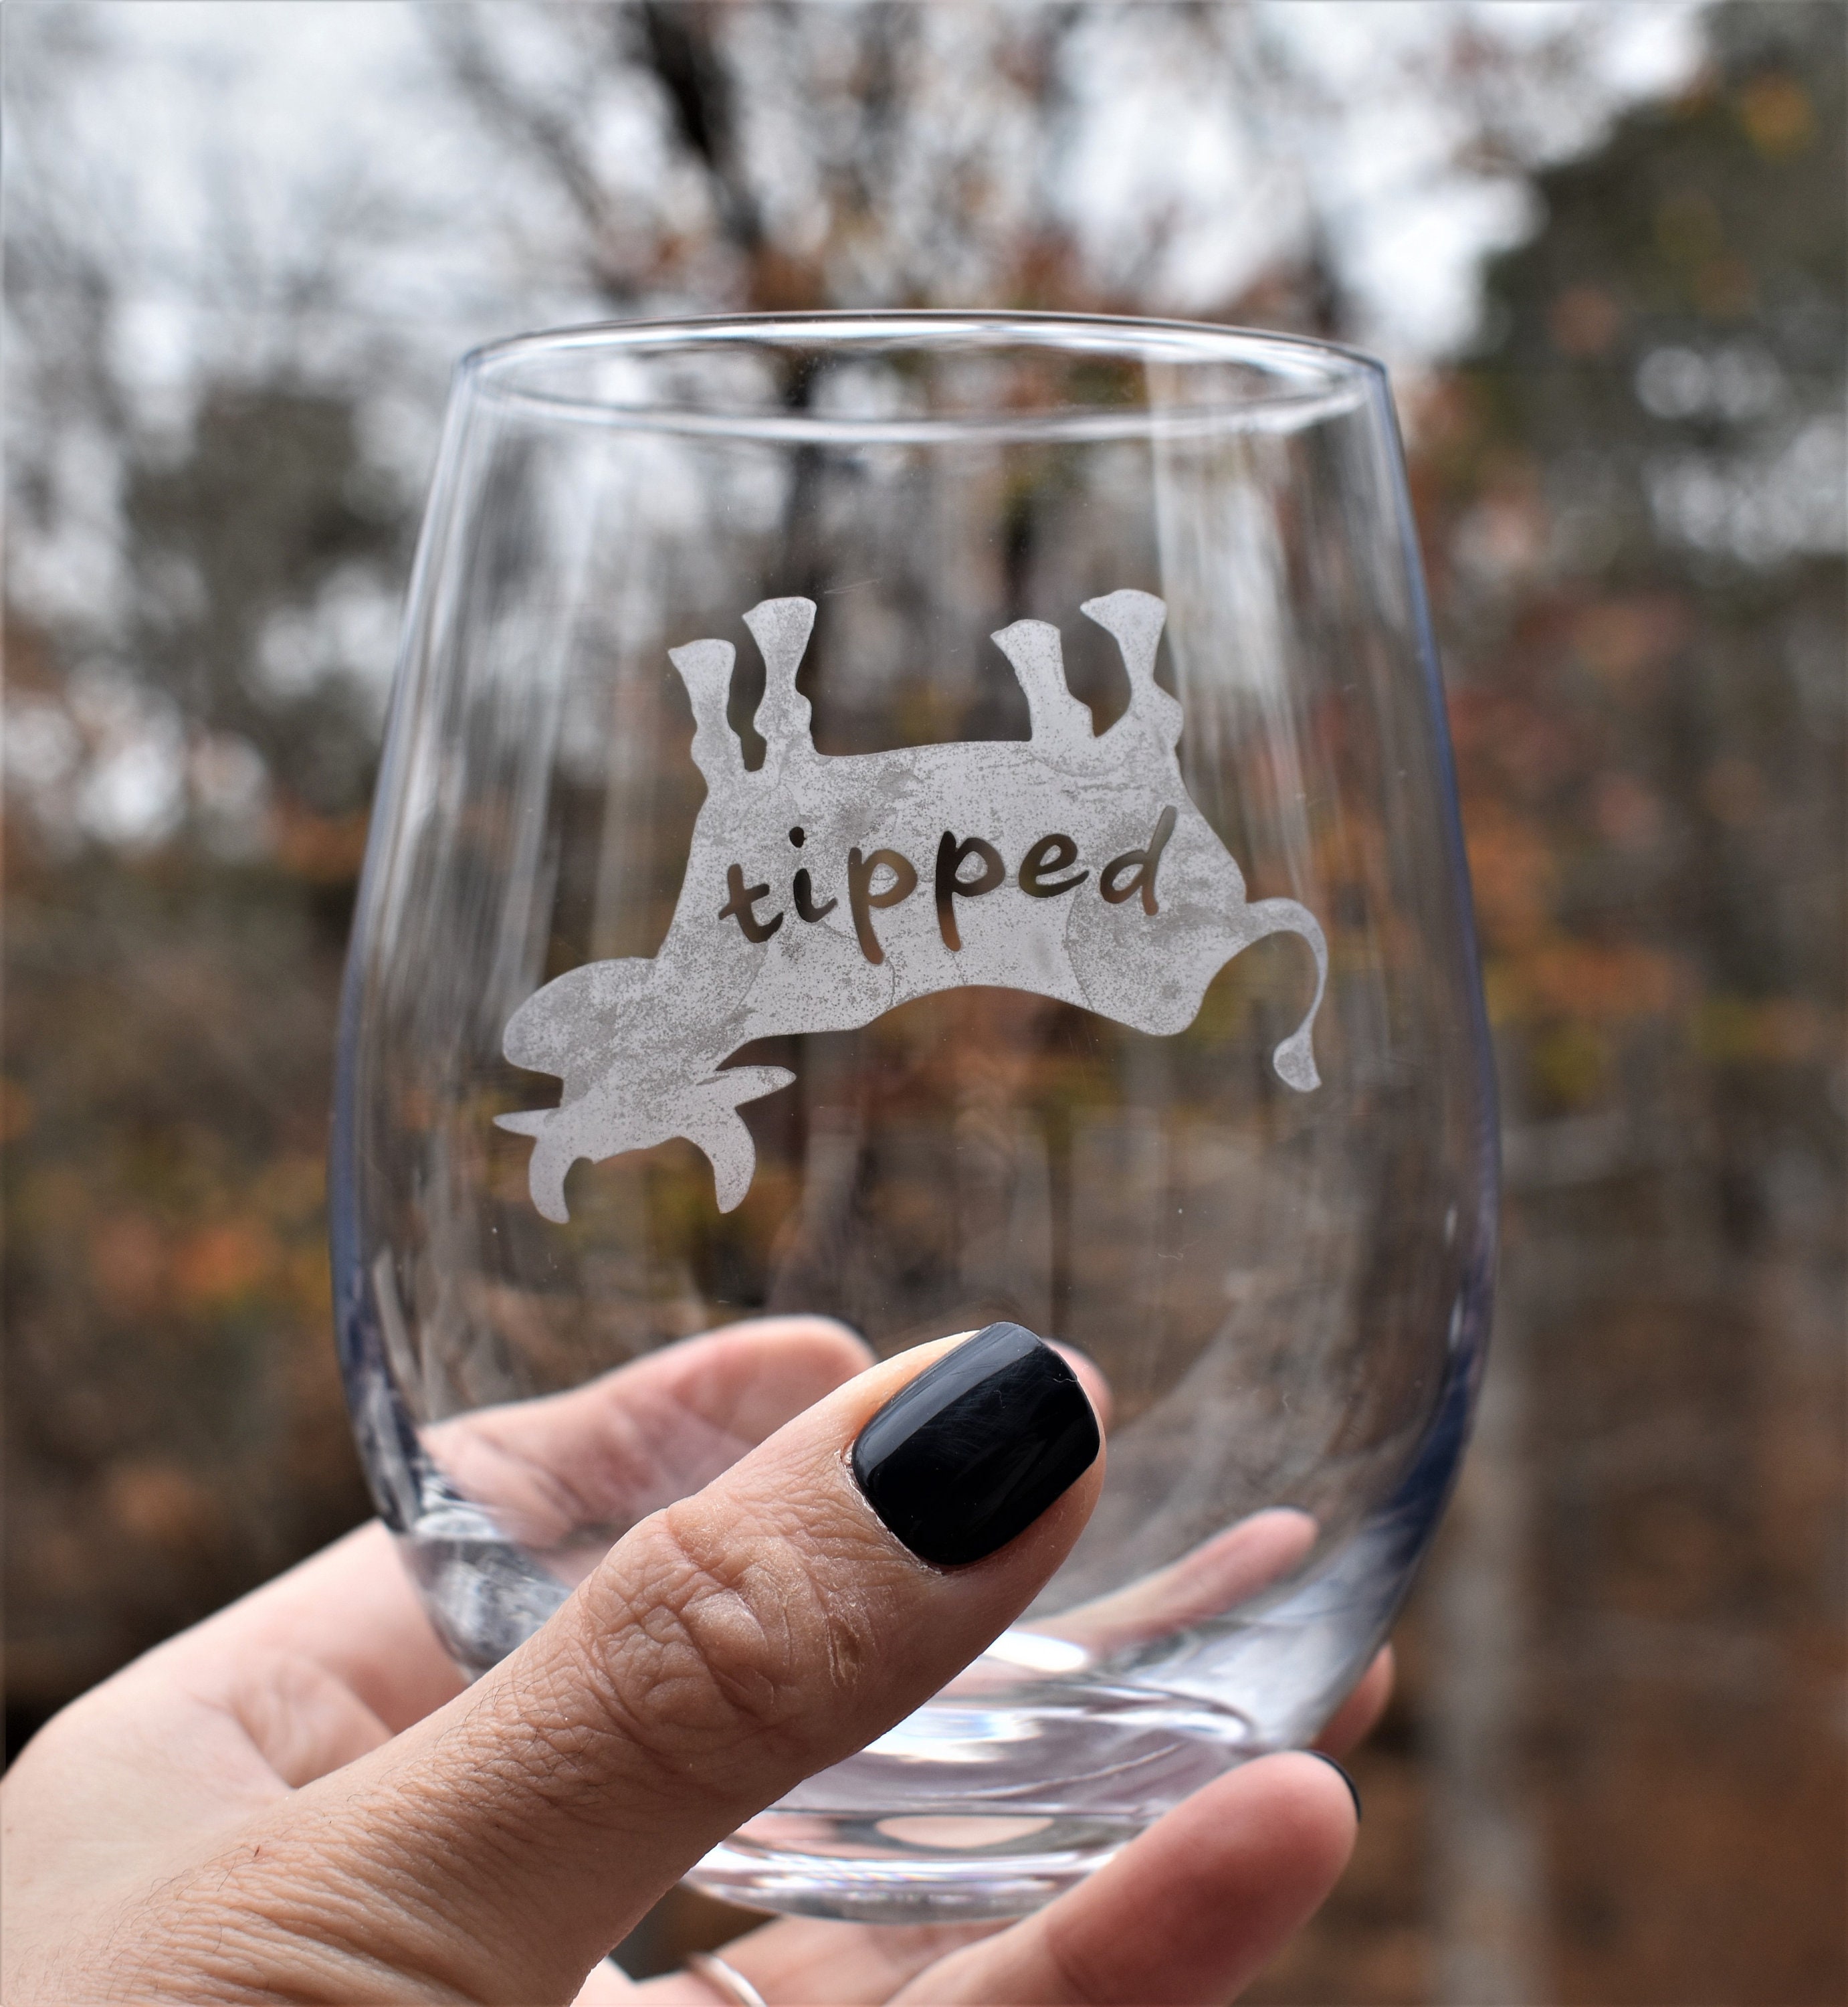 Custom Tipsy Curved Wine Glass Cup for Drinking - China Tipsy Wine Glass  and Curved Wine Glass Cup price